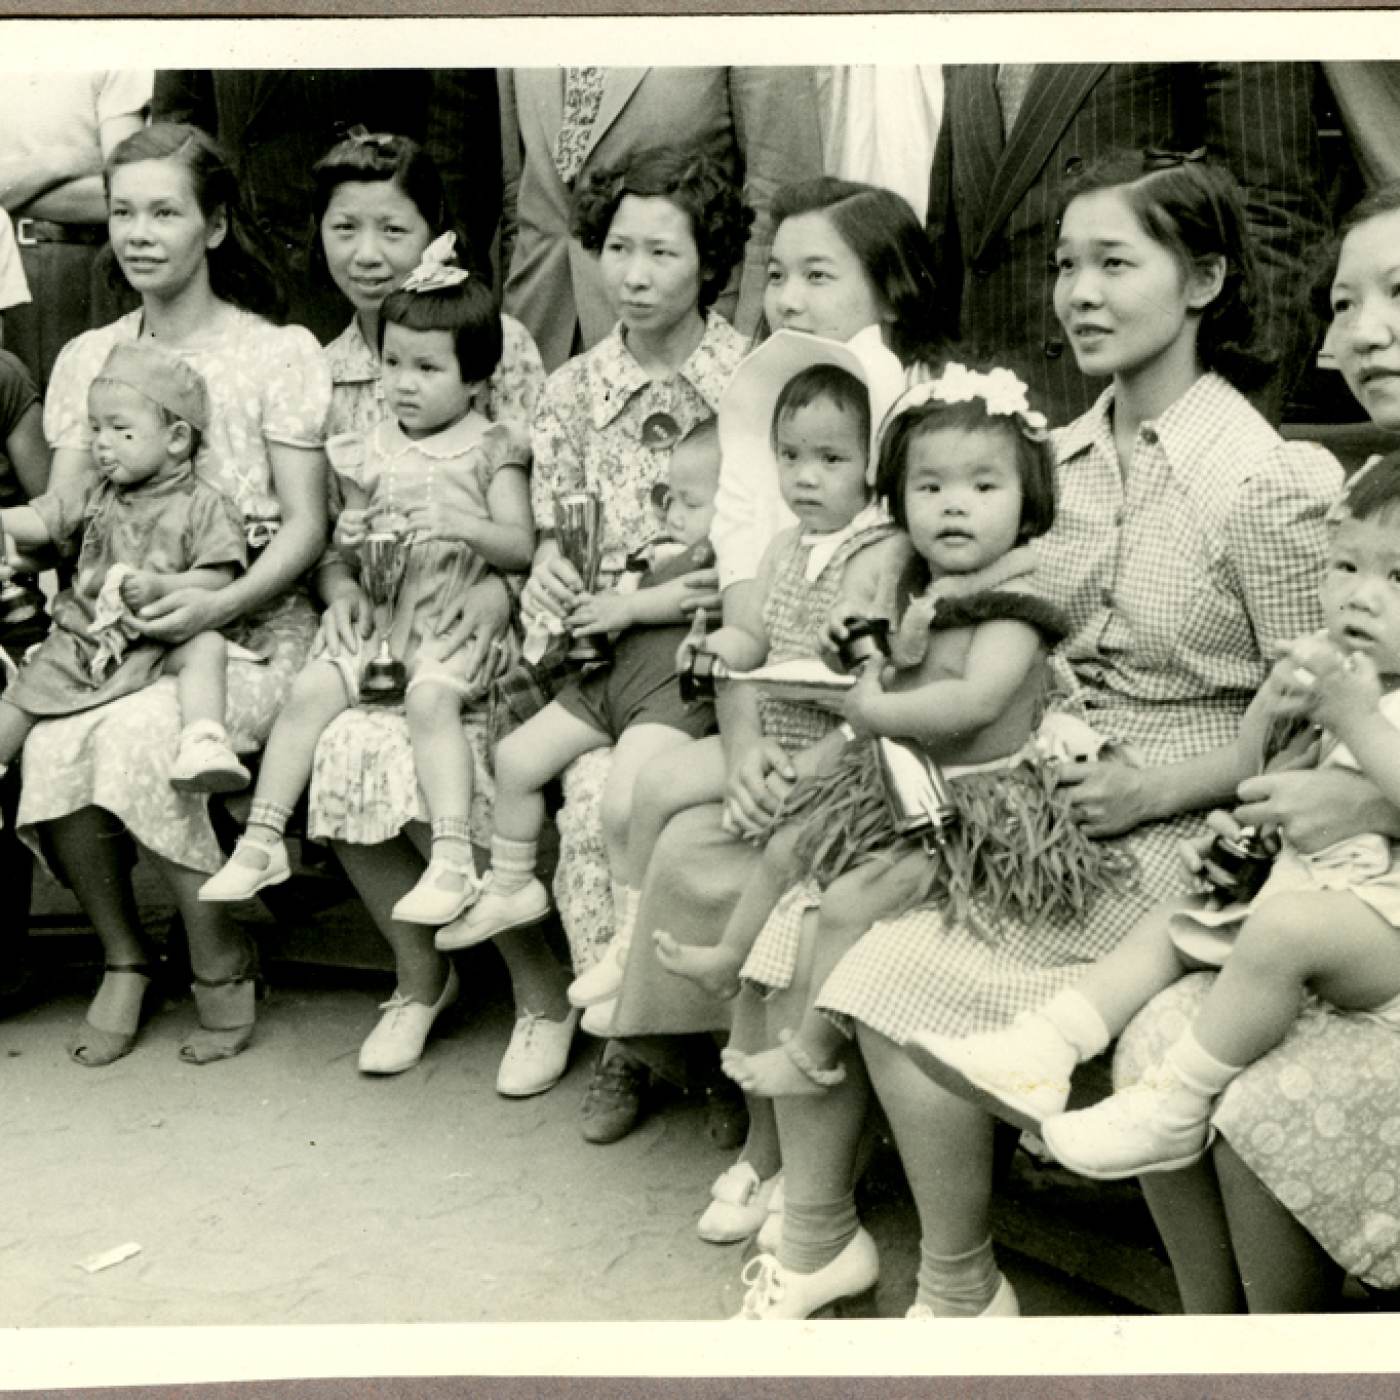 2012.002.002 A group photograph of the participants in the New York City Chinatown baby contest held on June 17, 1939 in Columbus park. Second from the right are mother and daughter Vivian Dai and Meling Dai (18 months). Third from the right are Meme Chen with her daughter Jaqueline Young (2 years). First from the left are May Moy with Patricia Moy (2 years). Third from left are Grace Lee Mok and her daughter Jade Mok, who won the prize for healthiest girl. Pictured at far right is Rose Lee Liu, wife of Dr. Arthur Liu, with her son Allan Liu. The Commissioner of Health and policemen, standing behind them, were the guests of honor. Courtesy of Meiling Dai, Museum of Chinese in America (MOCA) Collection.